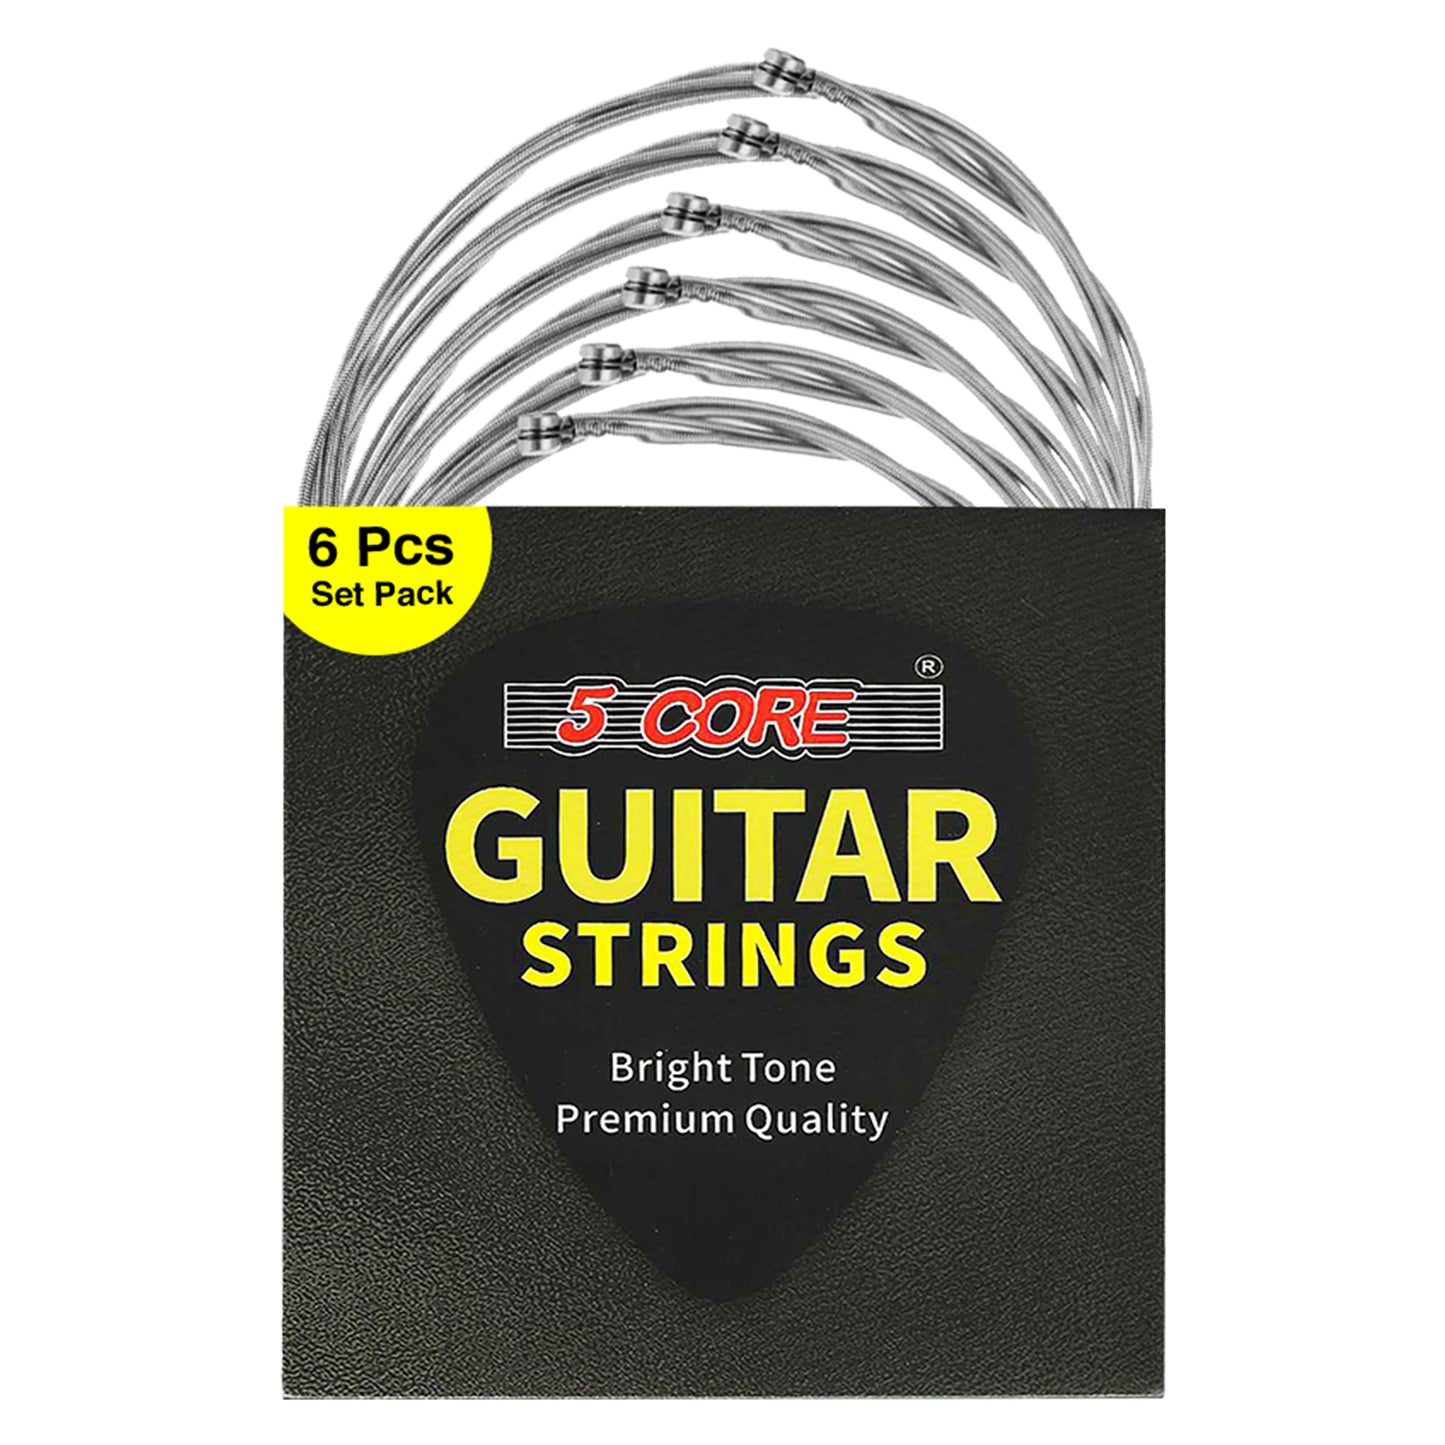 5 Core Electric Guitar Strings | 6 String set in 1 Set | Pure Nickel Guitar Strings with Gauge .009-.042 | Perfect Intonation, Consistent Feel, Reliable Durability- GS EL NK